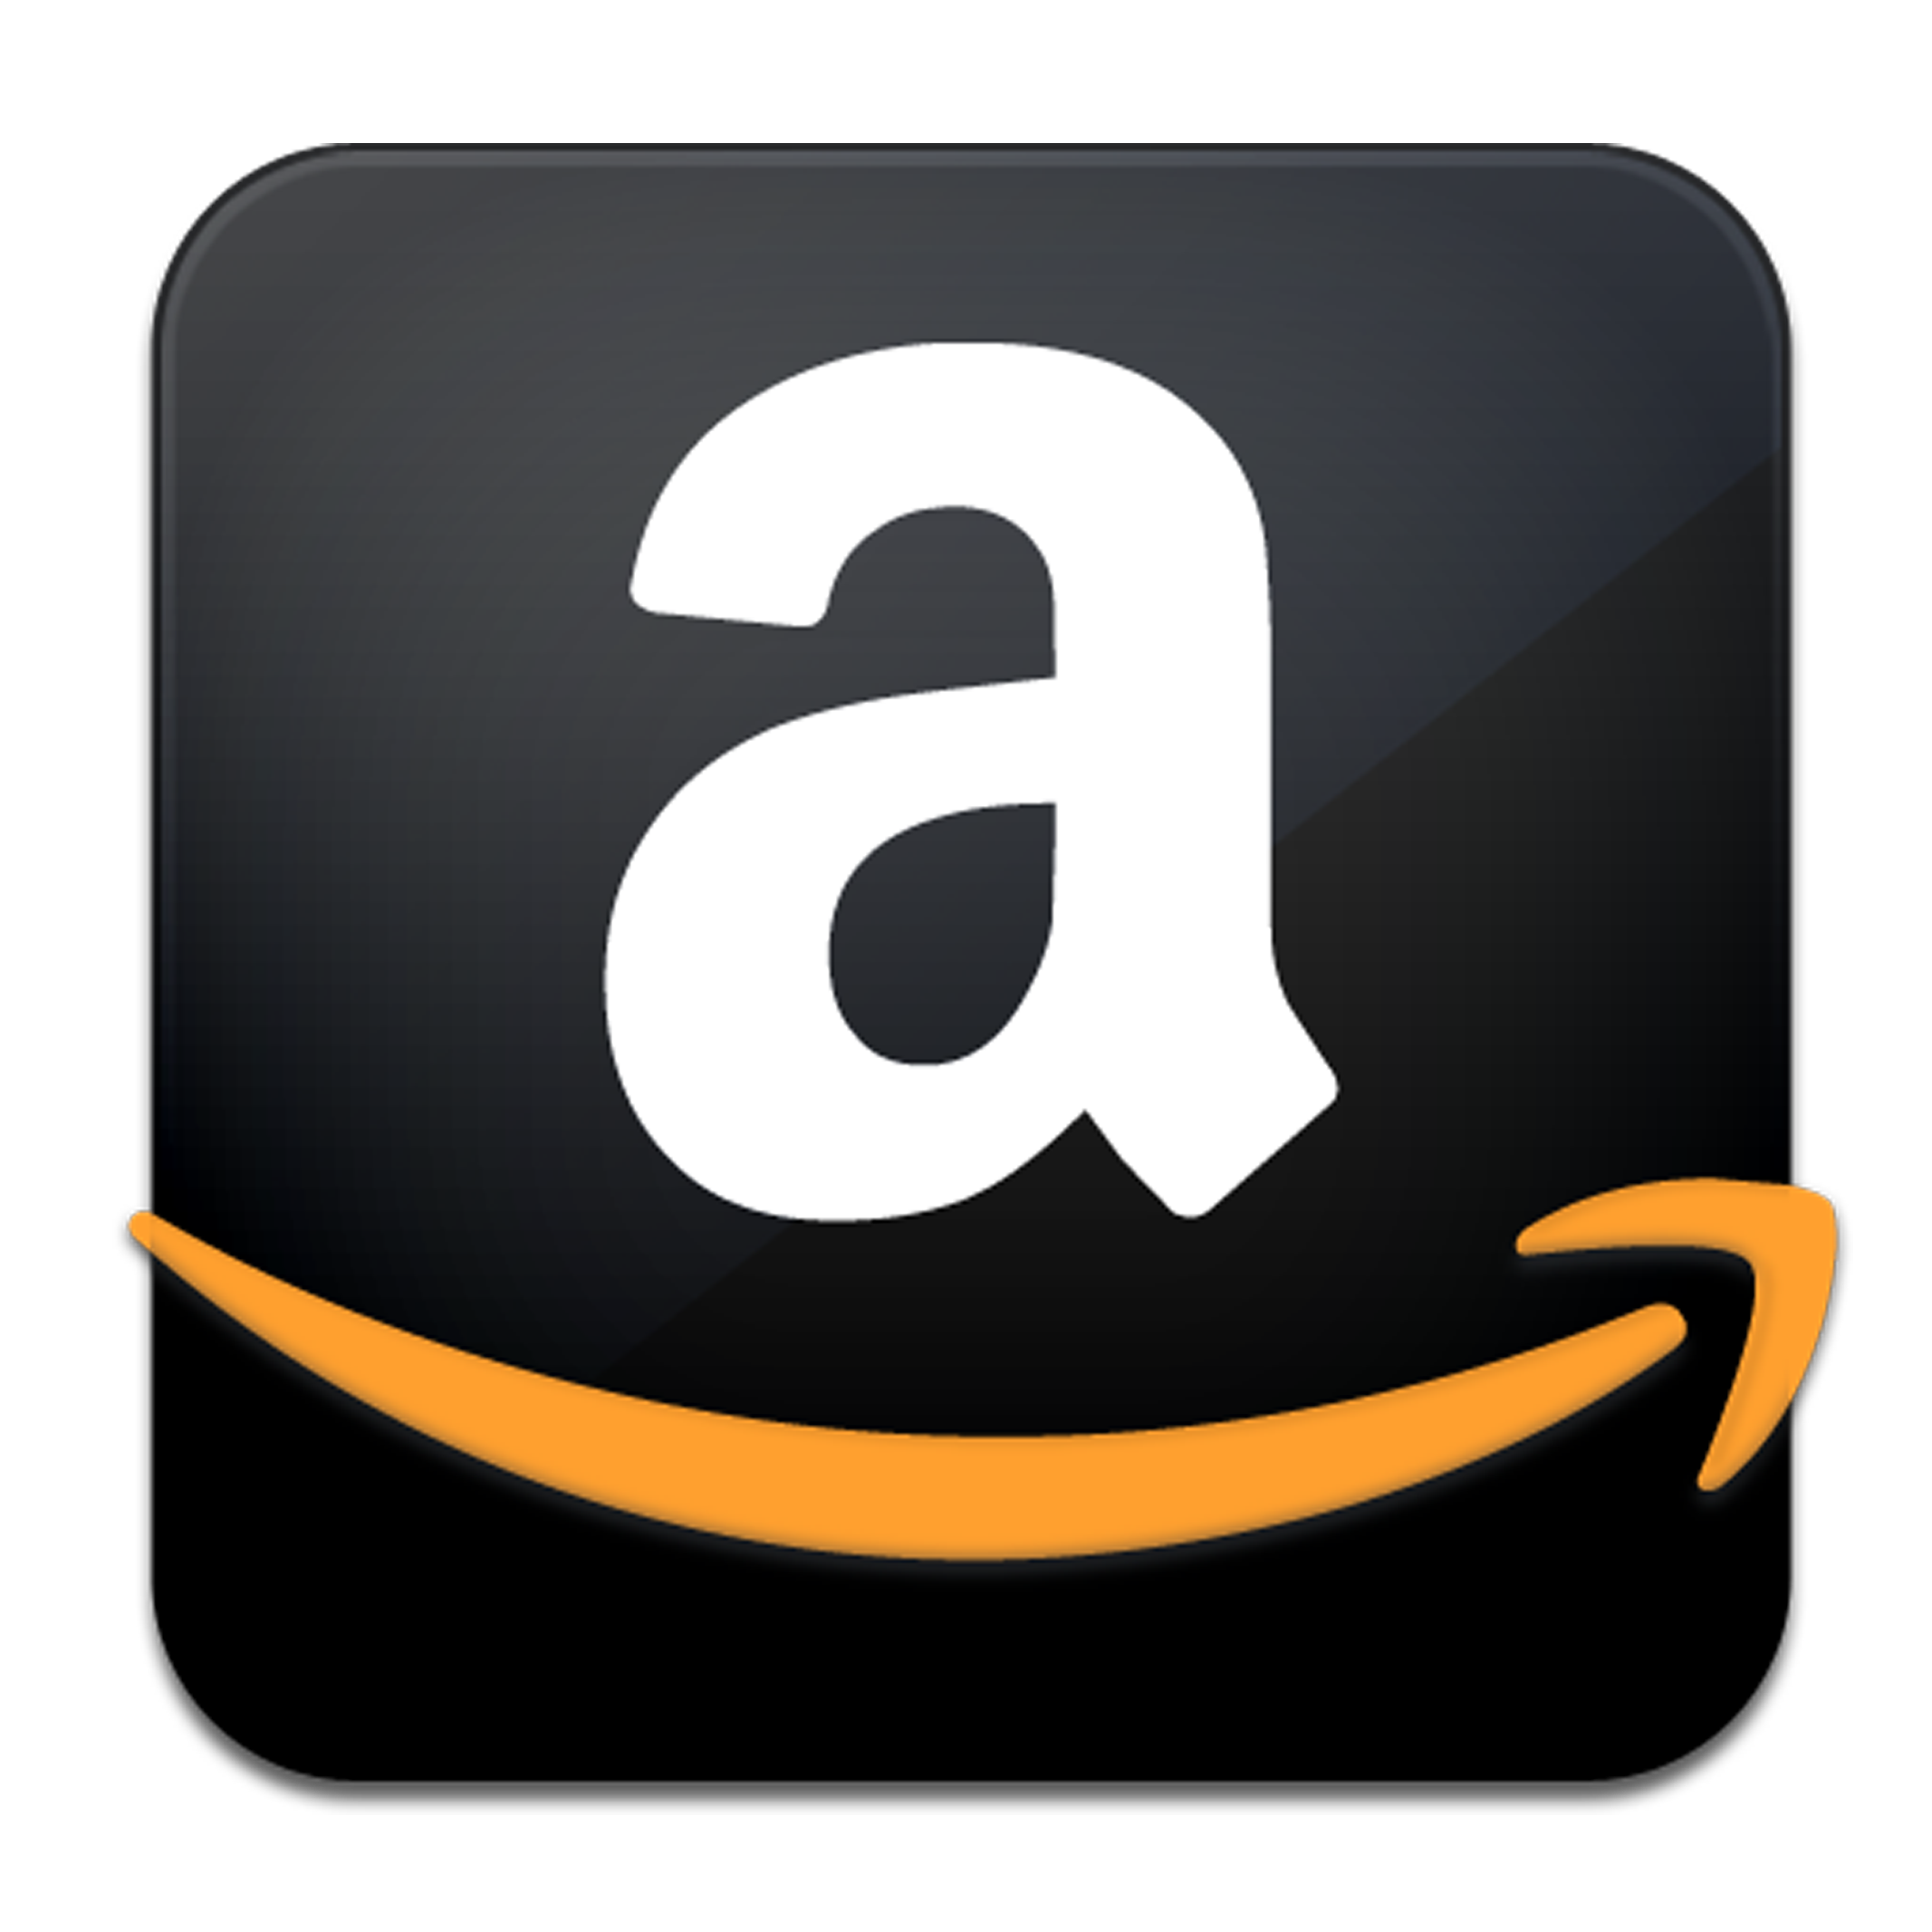 You can now follow us on Amazon